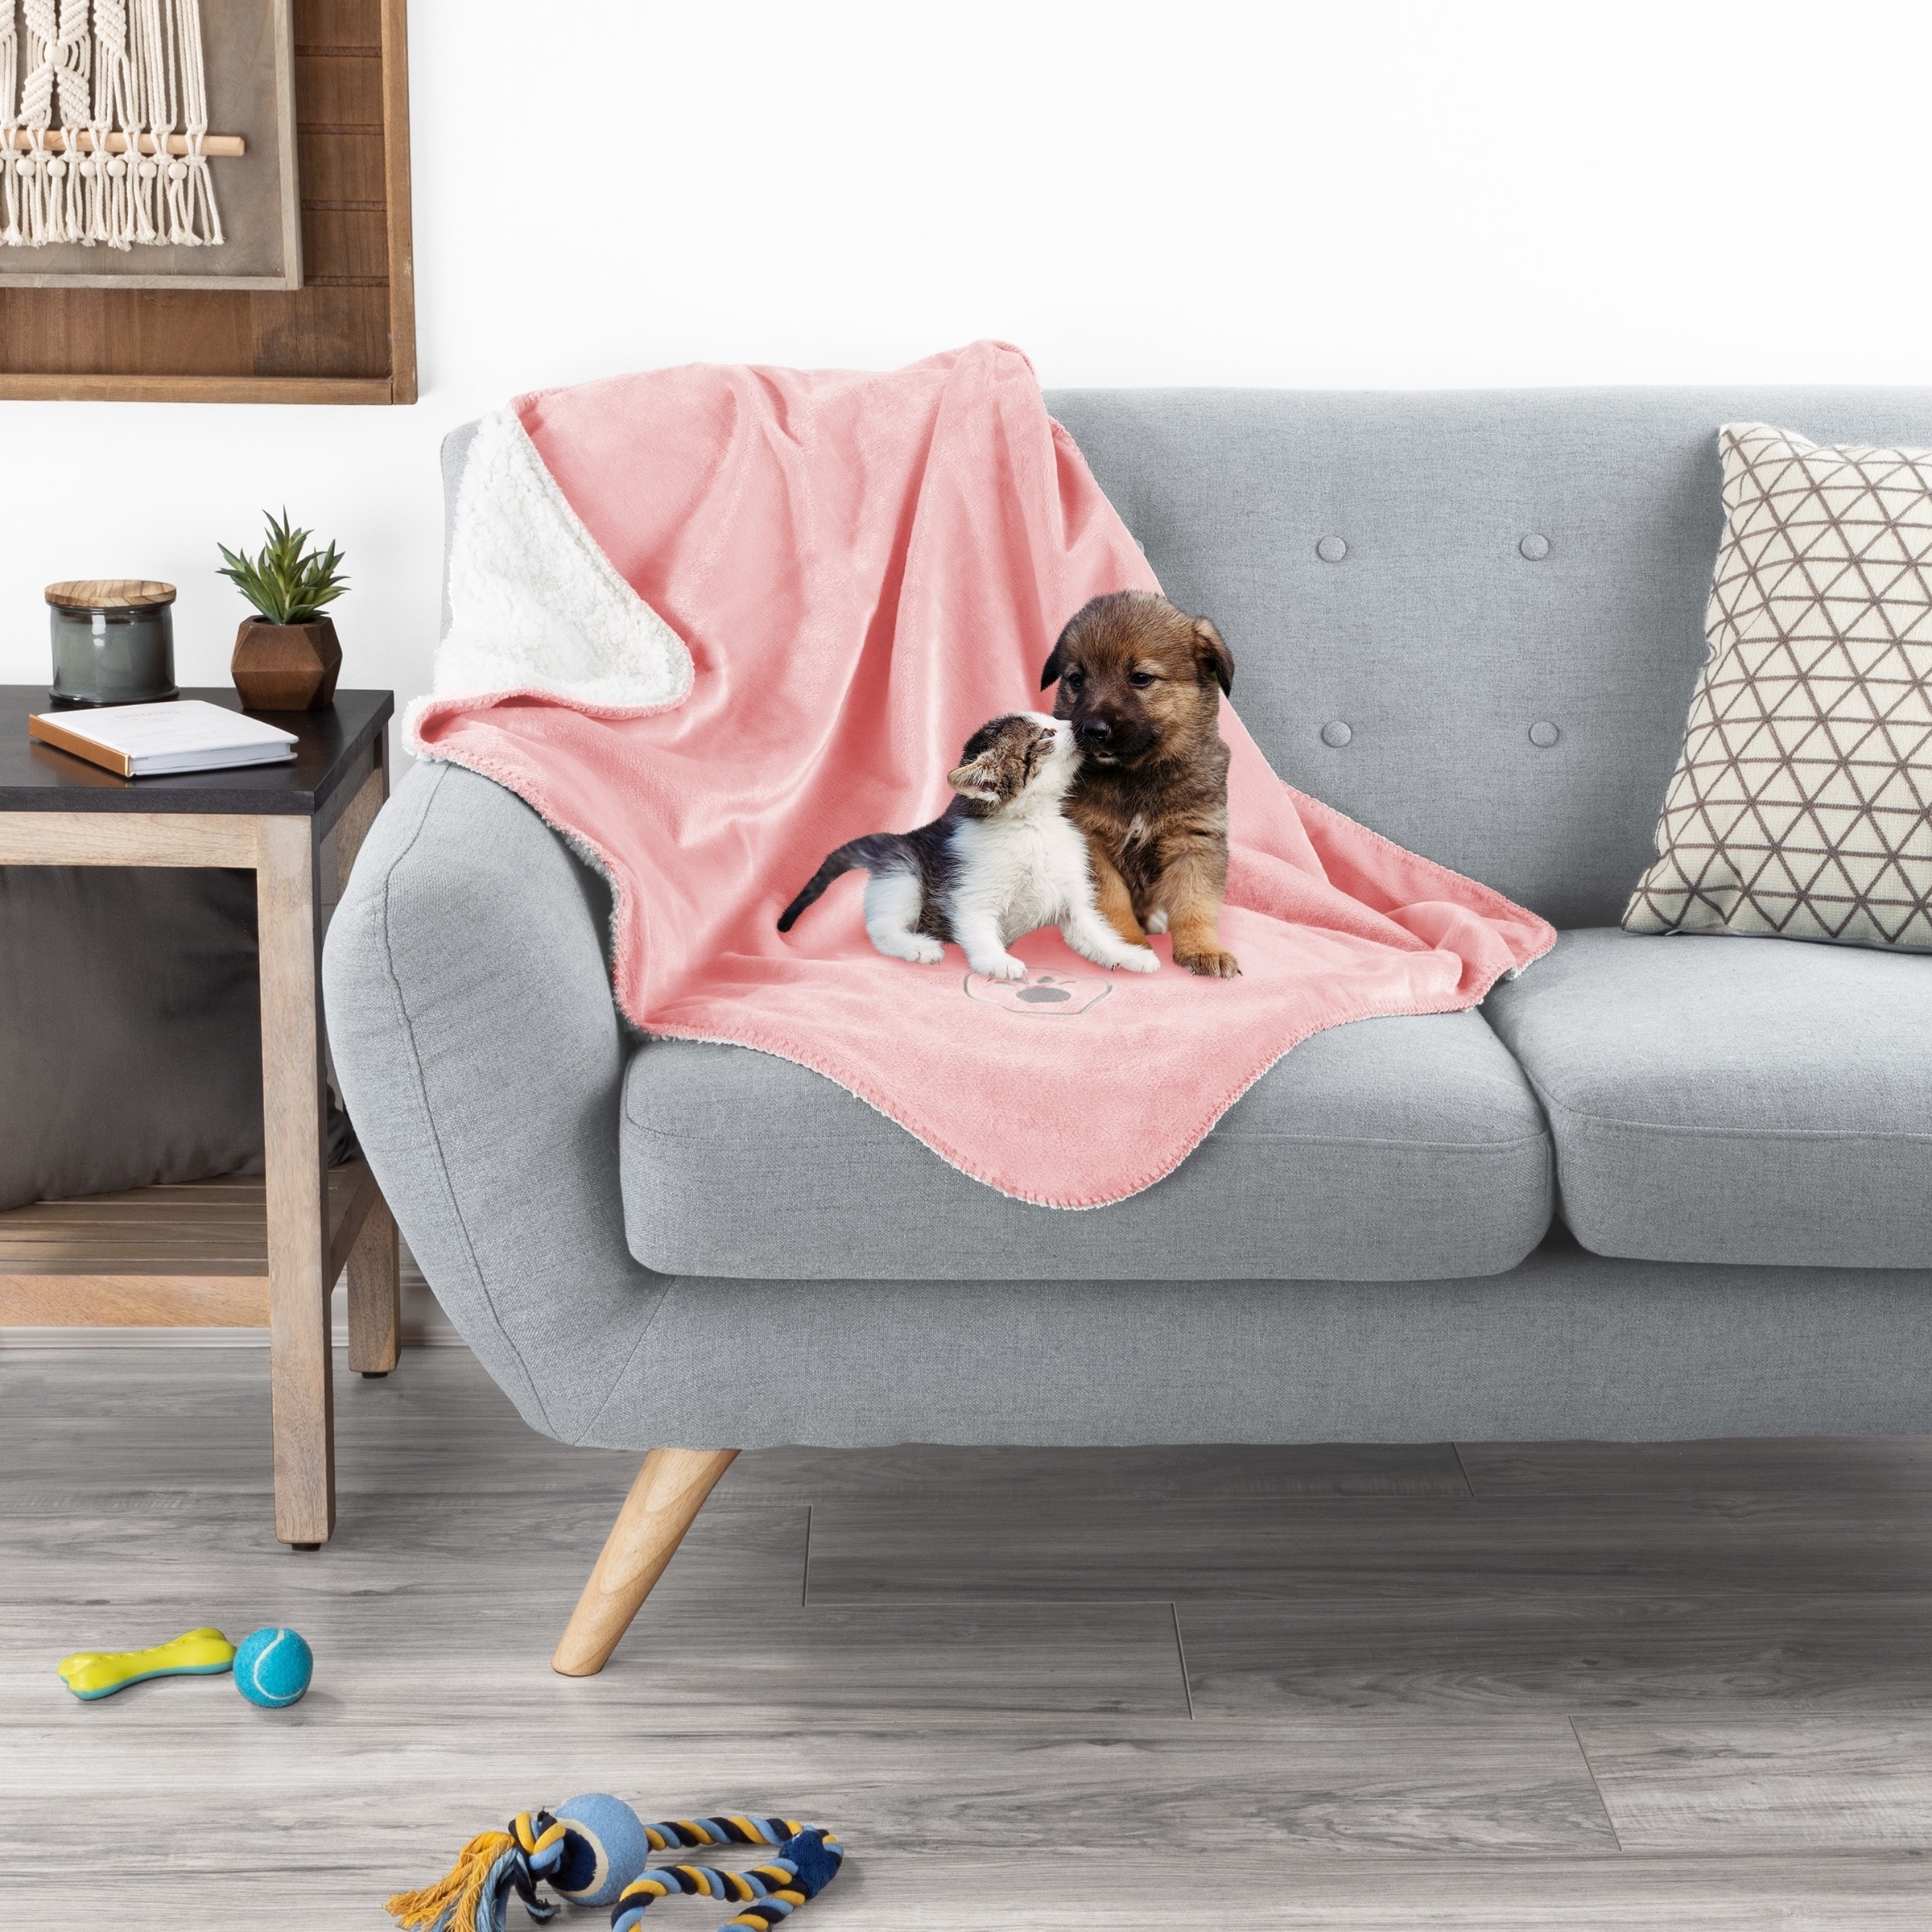 https://ak1.ostkcdn.com/images/products/28076967/Waterproof-Pet-Blanket-40inx30in-Plush-Throw-Protects-Couch-Chairs-Car-Bed-Machine-Washable-by-Petmaker-40x30-e61a8bd5-bca7-41fe-b200-2c2679c6f1fe.jpg